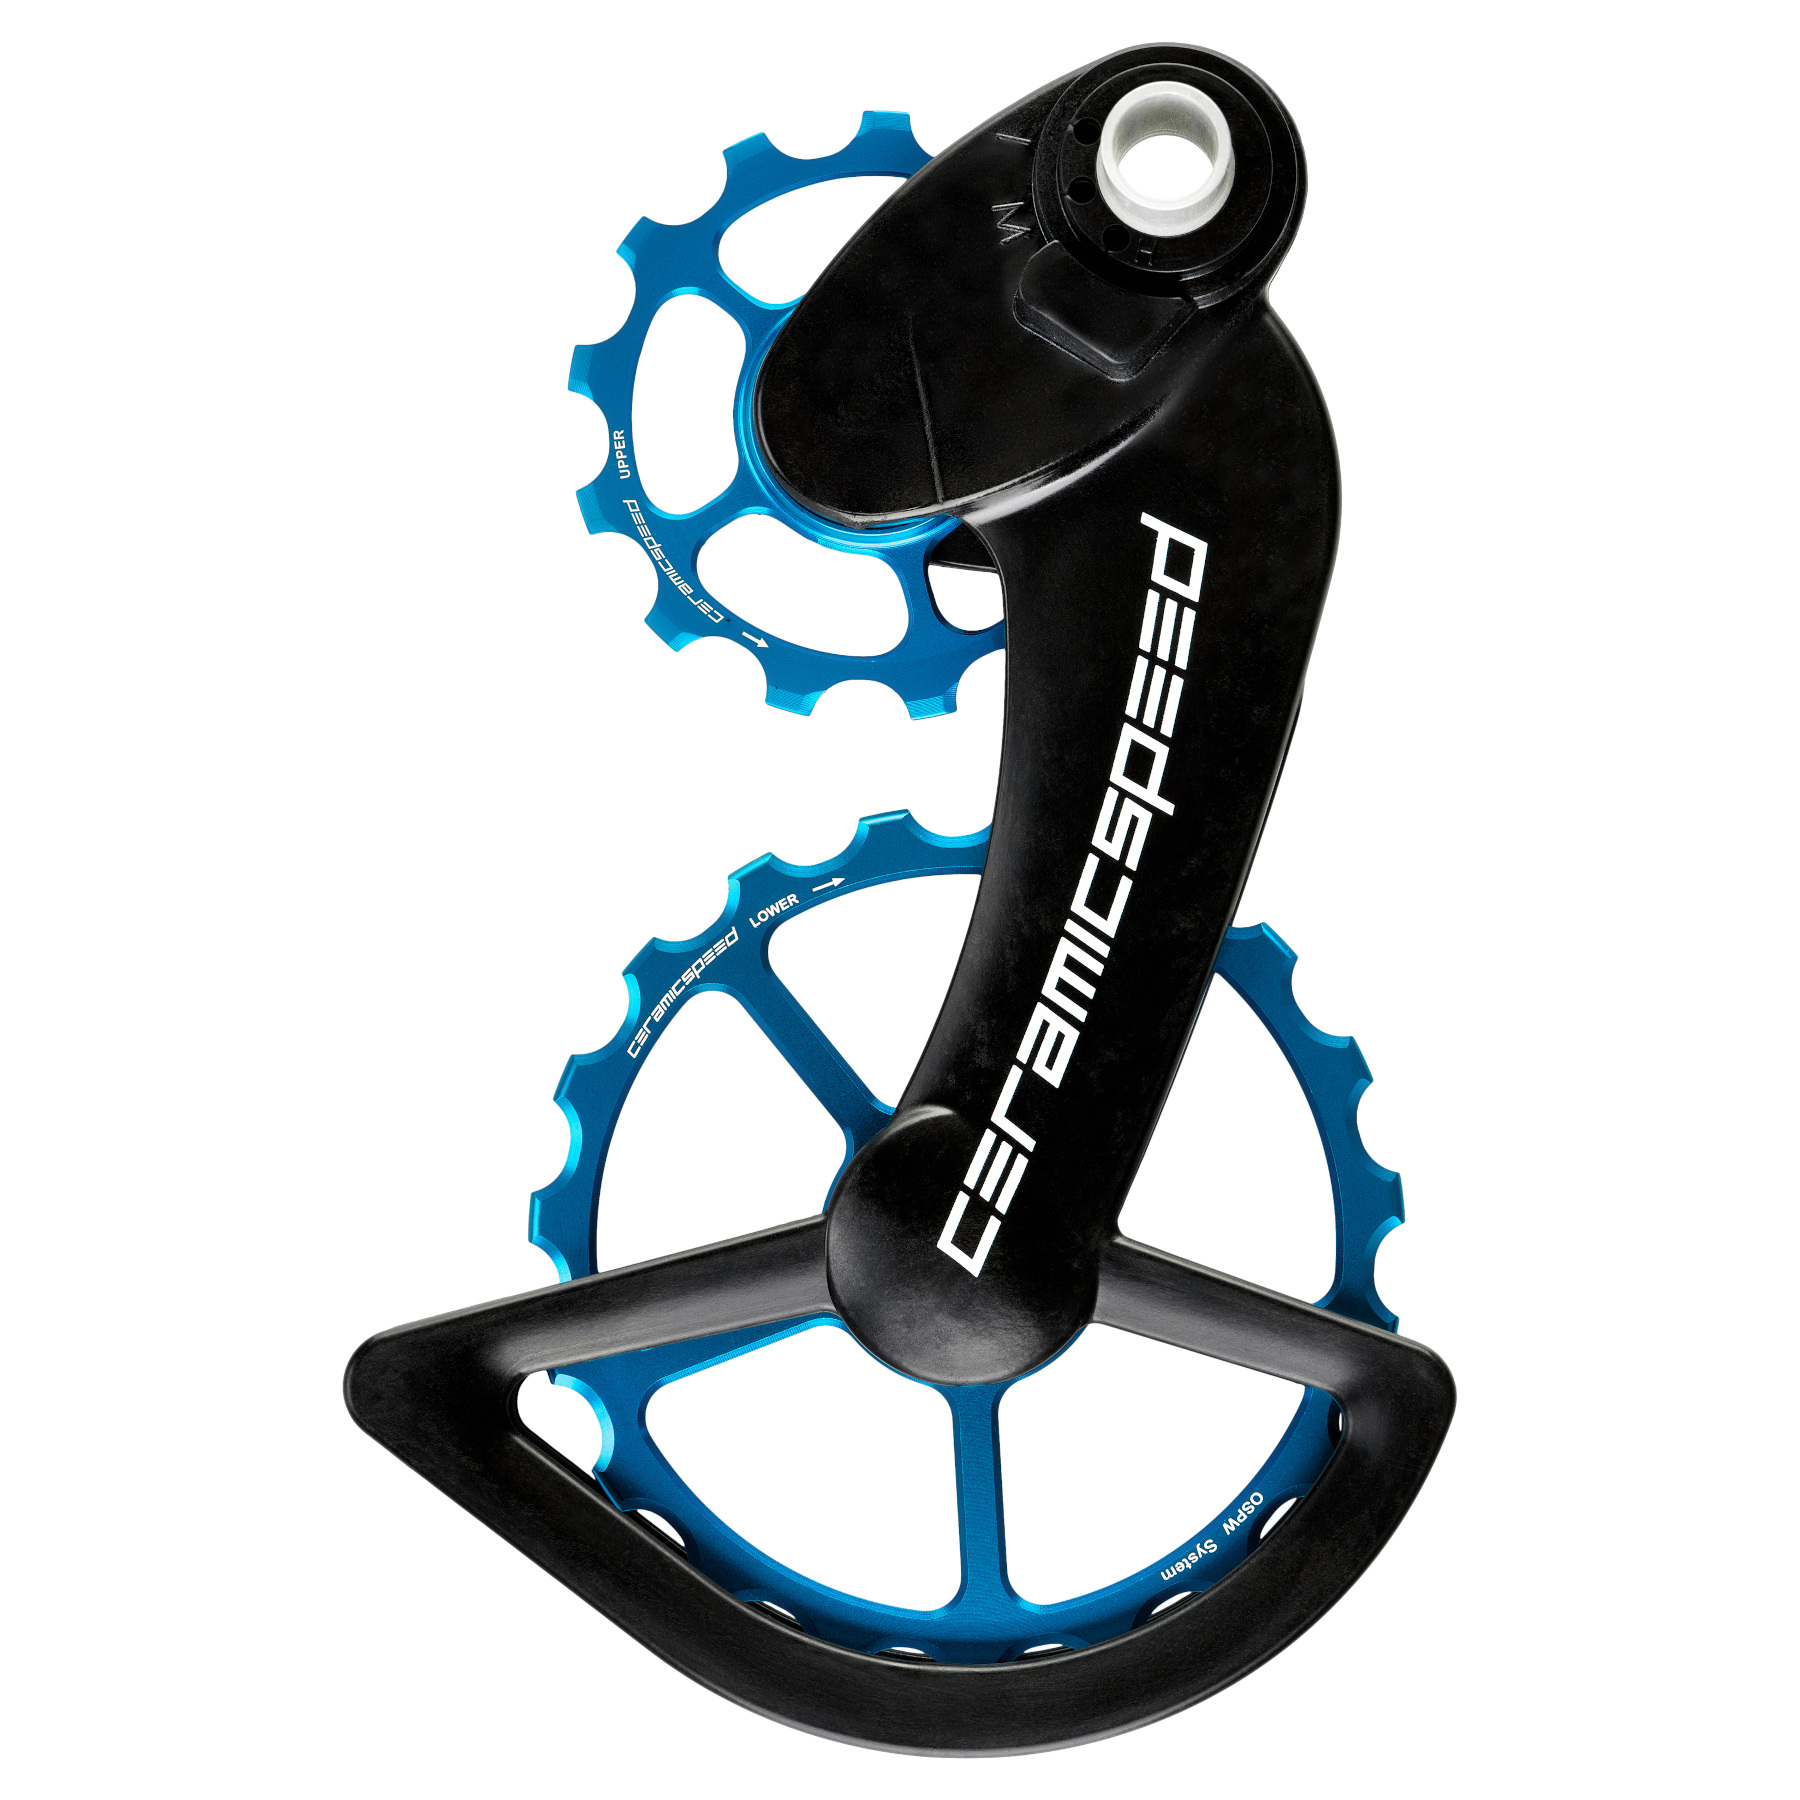 Picture of CeramicSpeed OSPW Derailleur Pulley System - for Campagnolo EPS 12s | 13/19 Teeth | Coated Bearings - blue